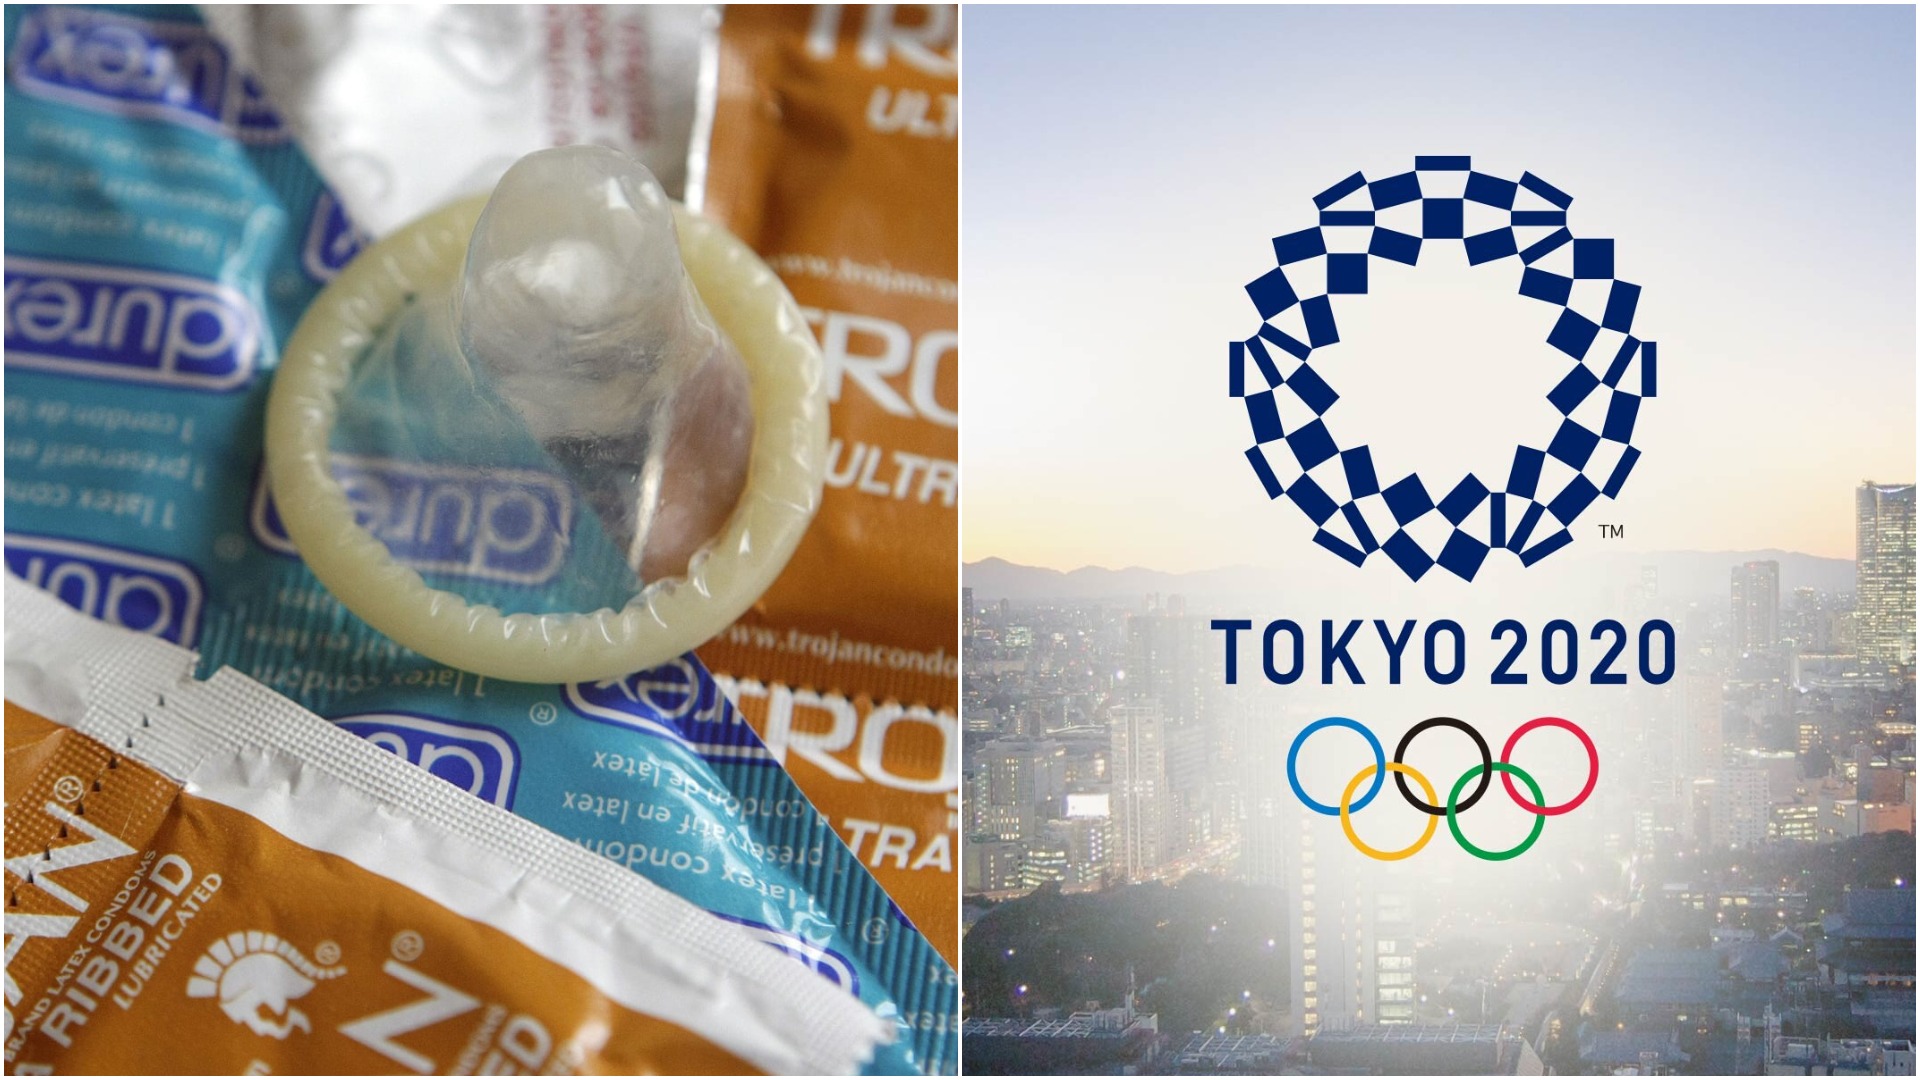 No Usage Of Condoms At Tokyo Olympics Athletes To Take Them Home 